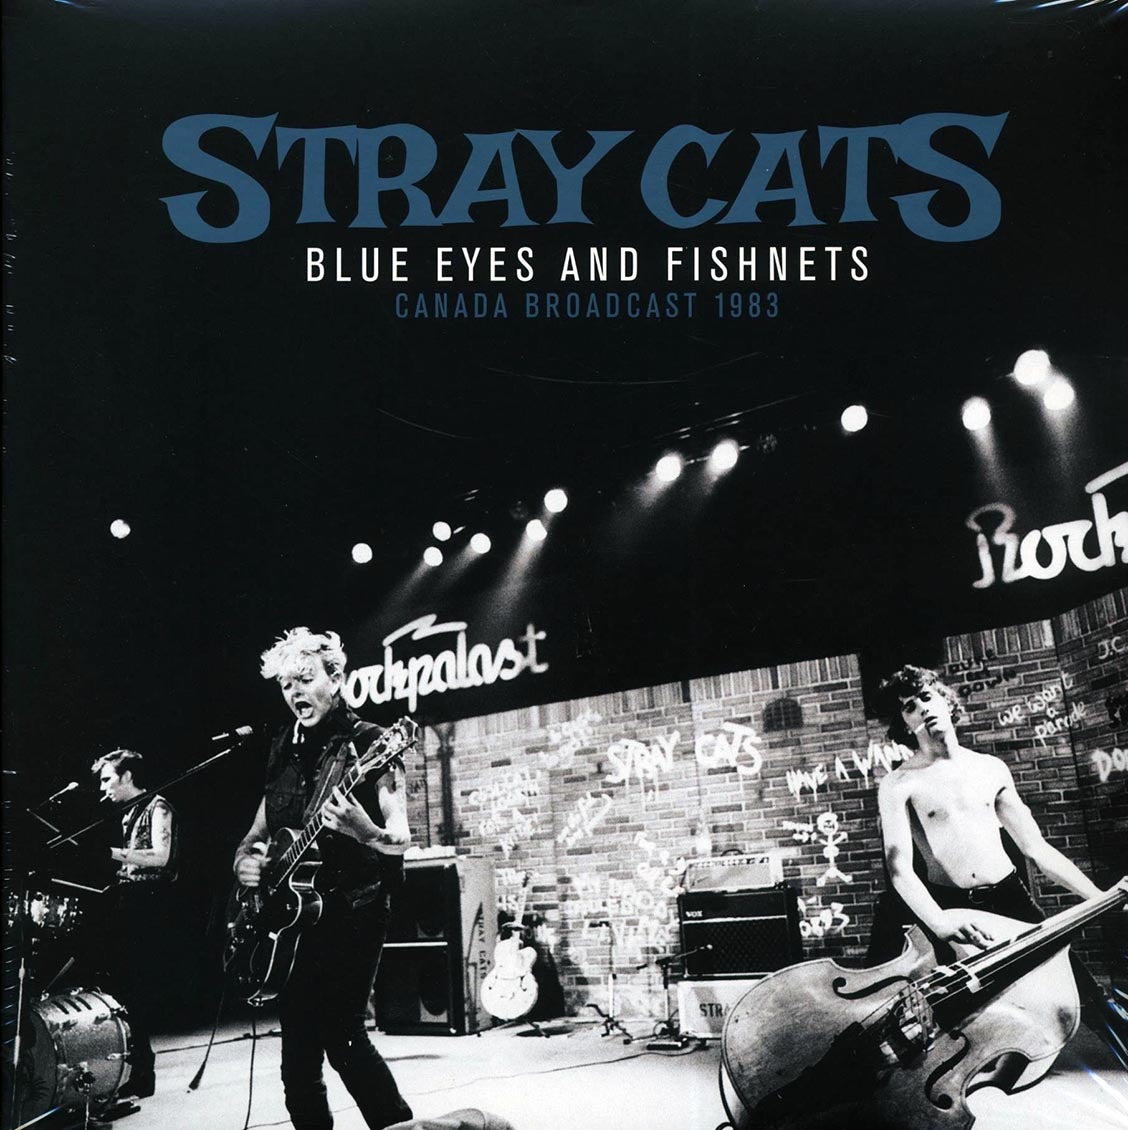 Stray Cats - Blue Eyes And Fishnets: Canada Broadcast 1983 (2xLP) - Vinyl LP